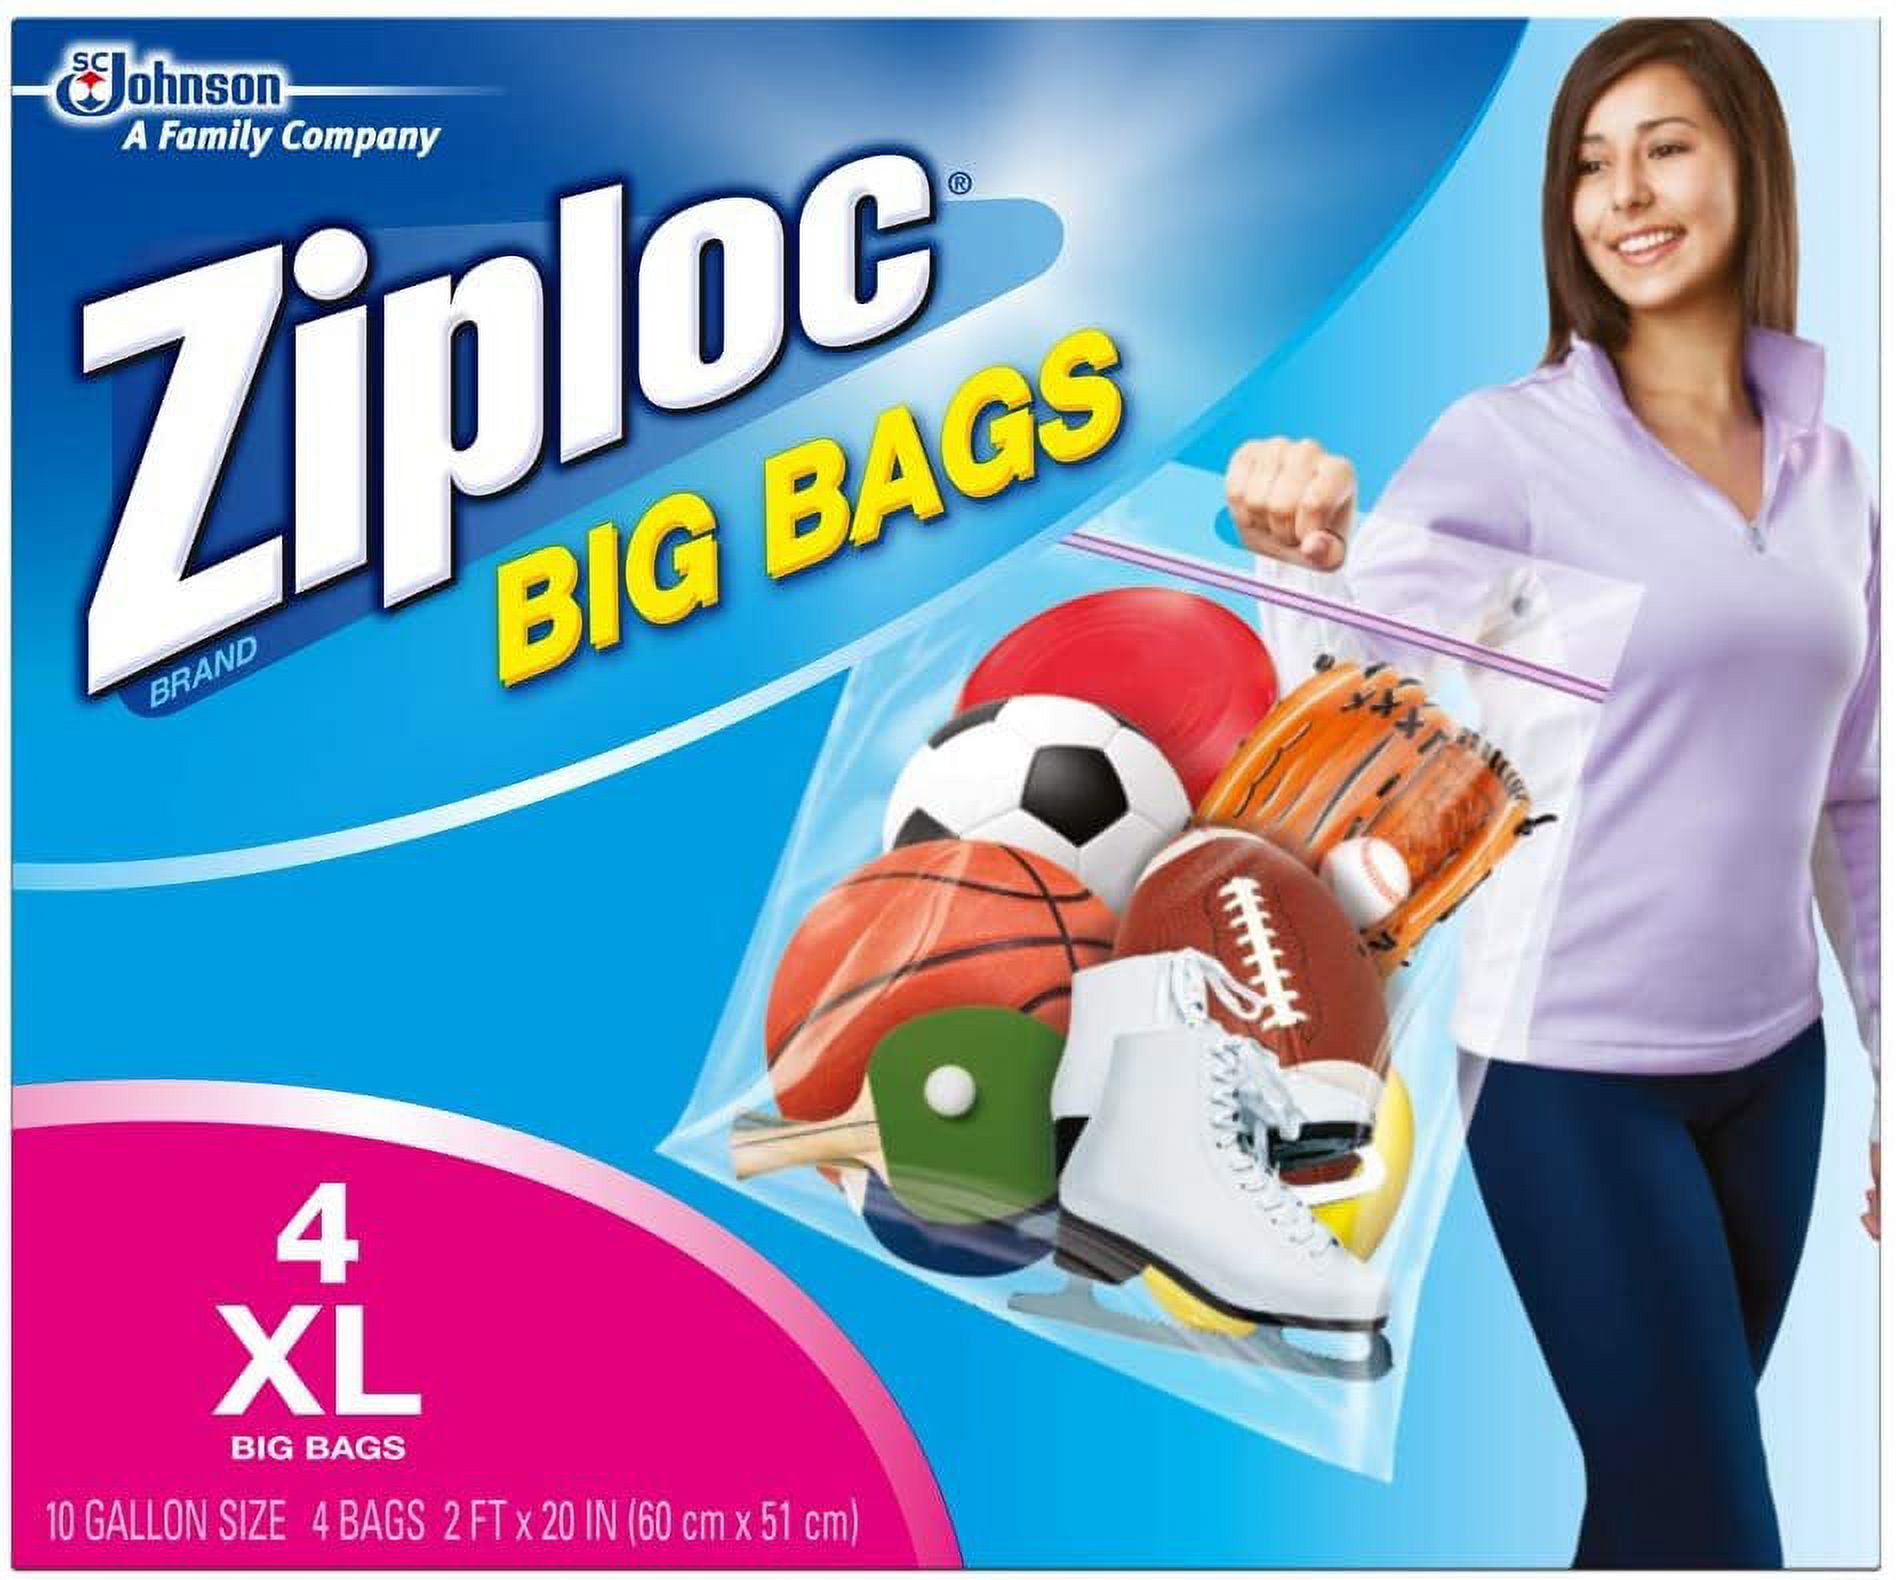 Ziploc Quart-Size Bags (80 Count) — Only $6.99 for Prime Members